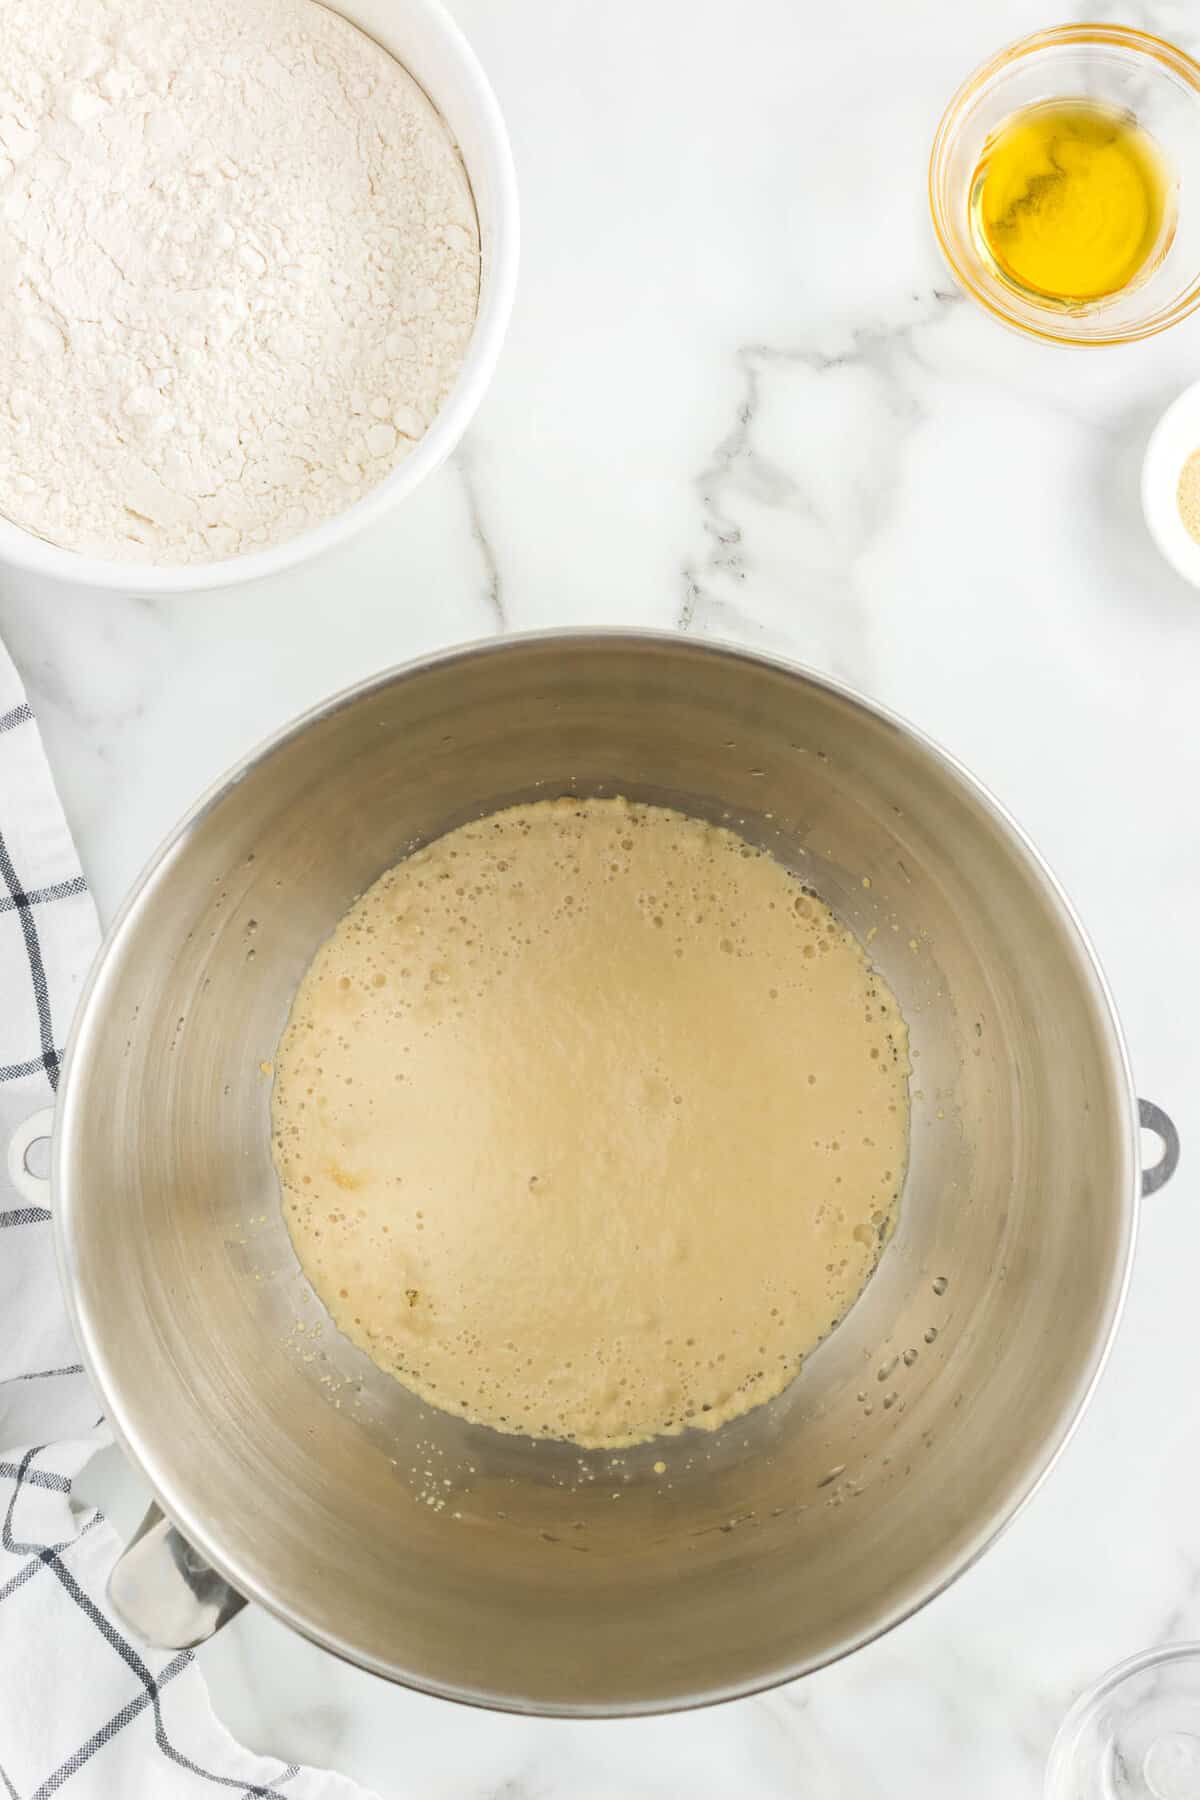 Allowing yeast mixture to proof for Homemade Pizza Dough recipe